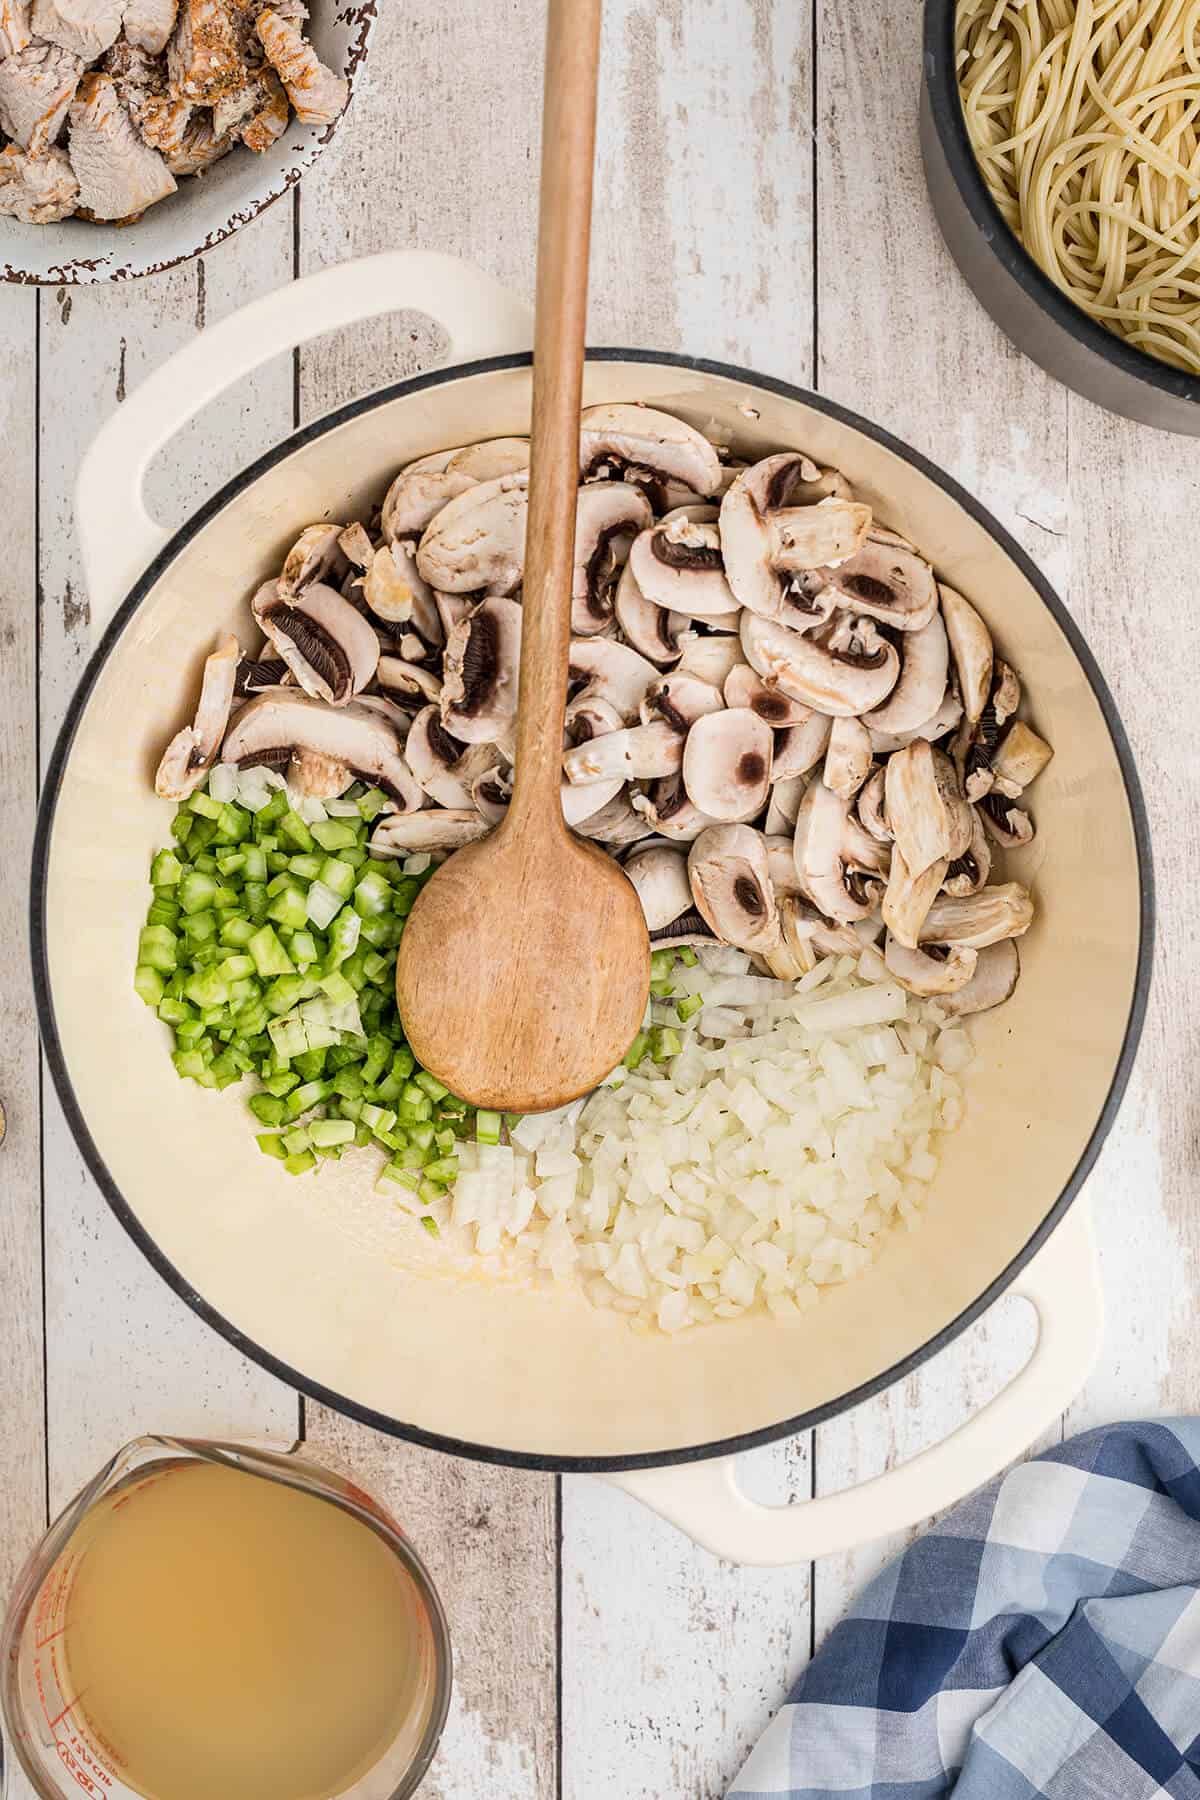 Onions, celery, and mushrooms cooking in a large saucepan.